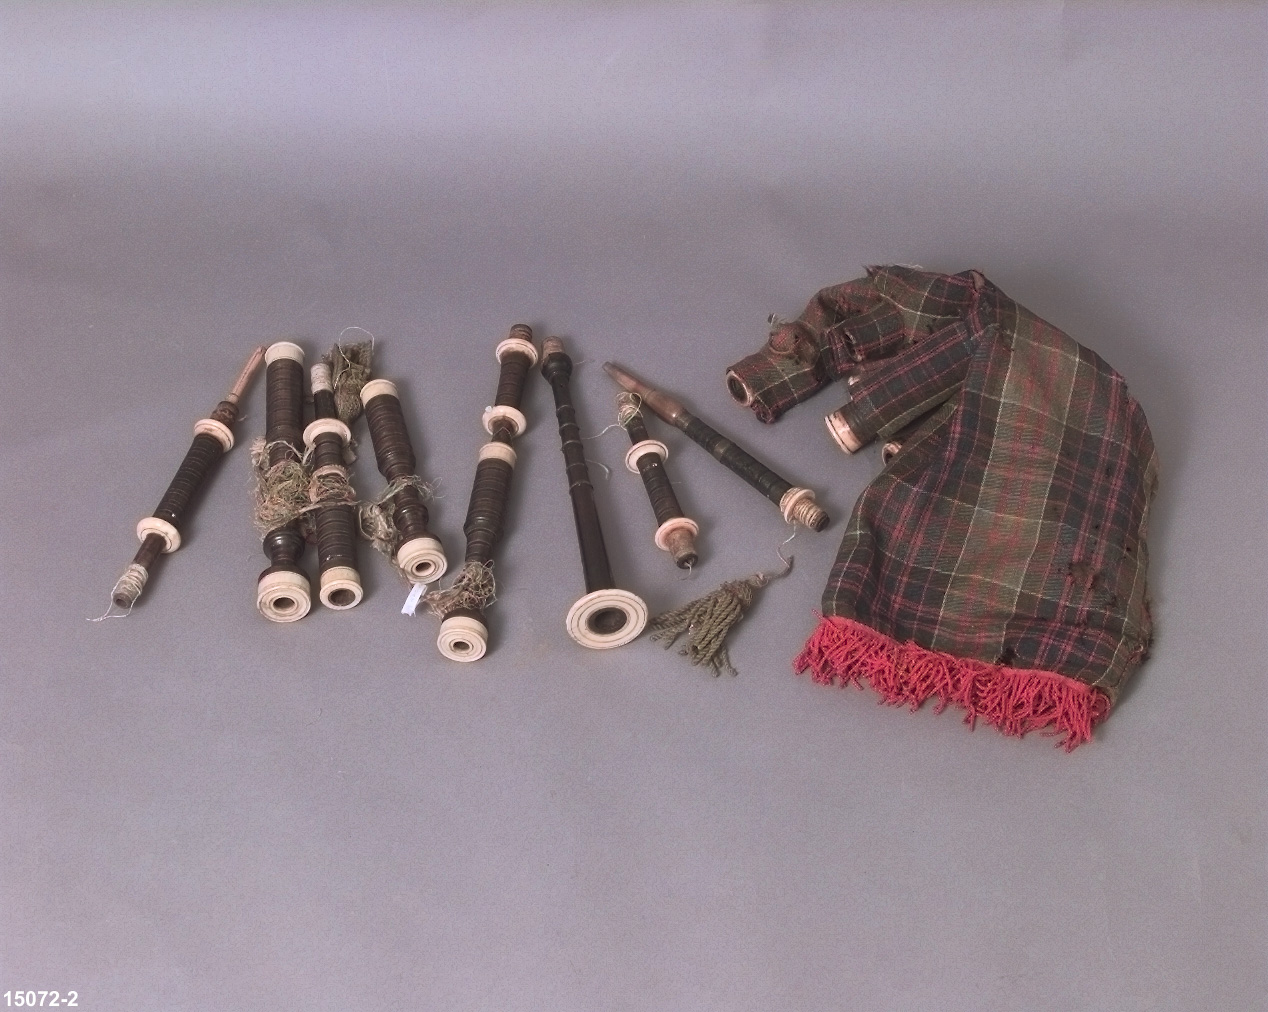 Bagpipes made by George Sherar